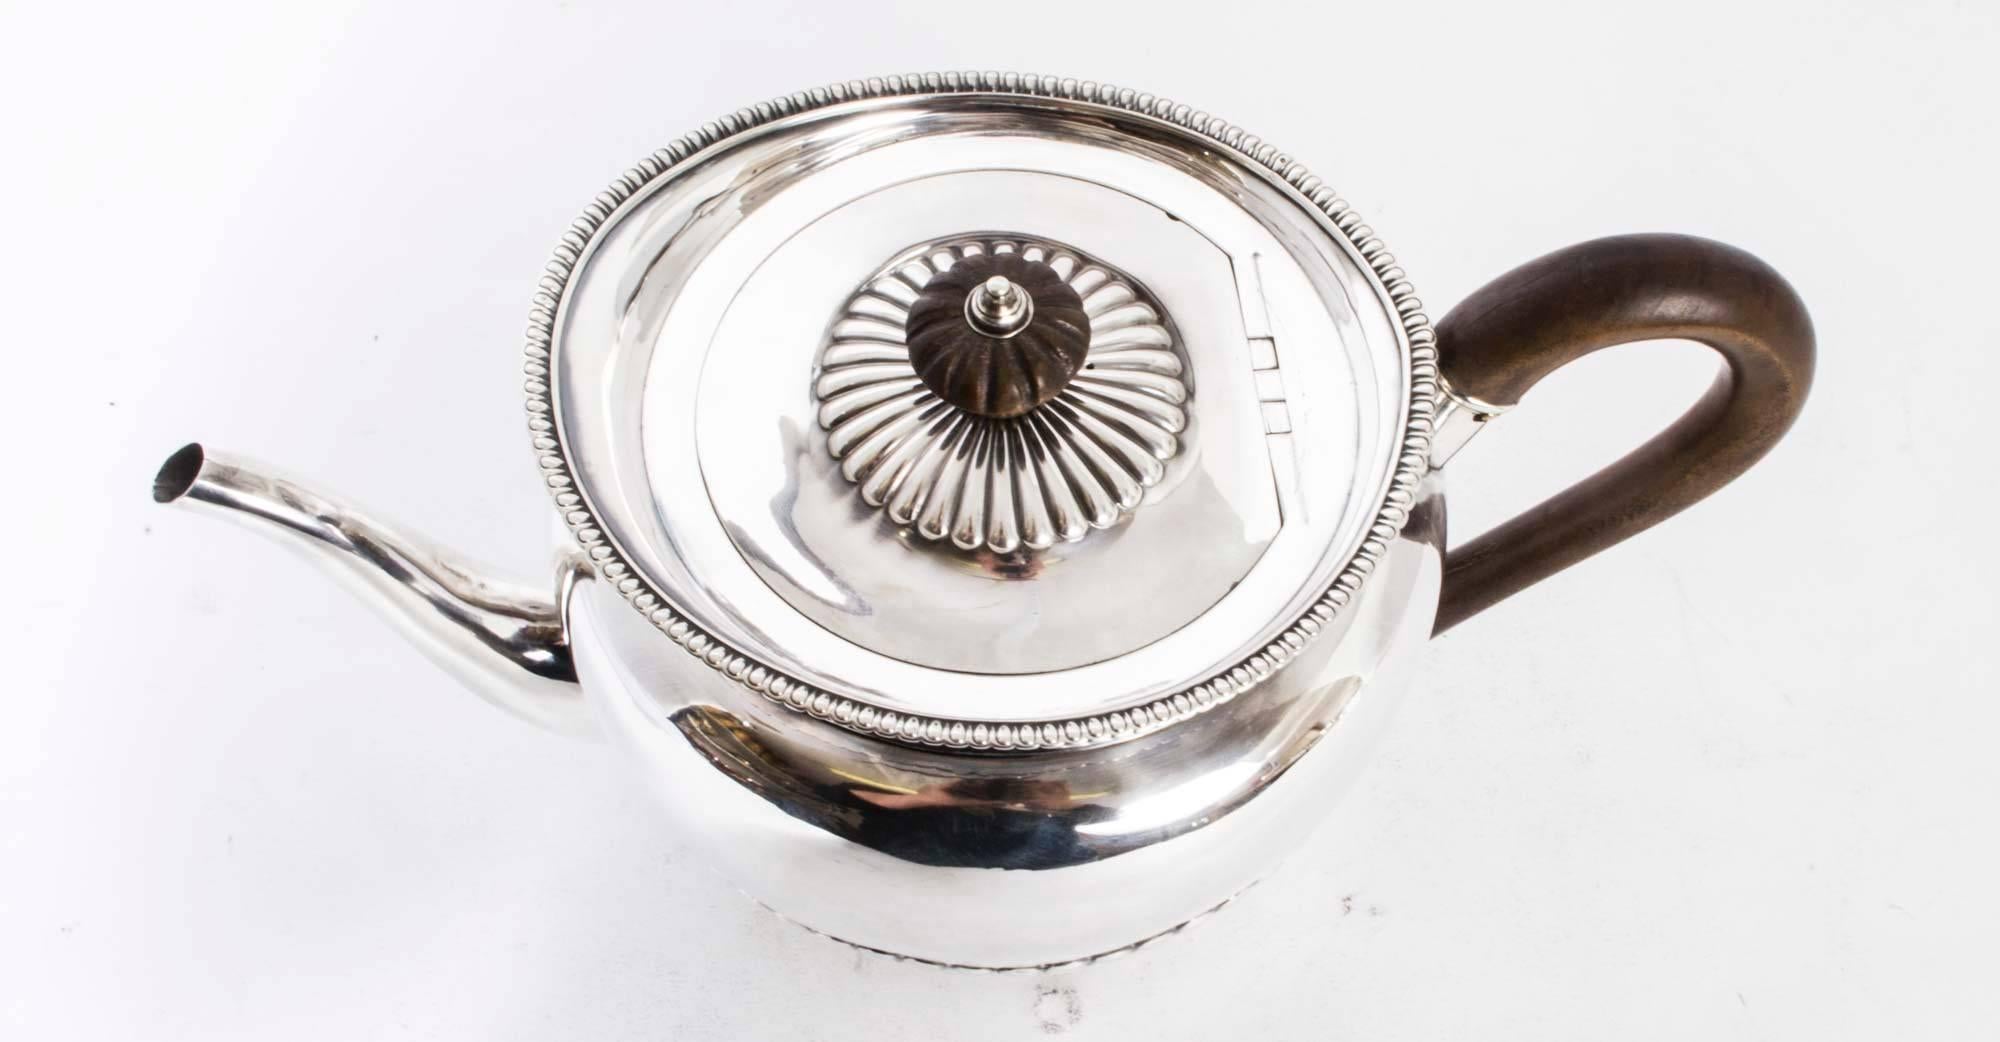 This is a superb antique sterling silver teapot with hallmarks for London 1826 and the makers mark of one of the most celebrated silversmiths of all time, Paul Storr.

It is beautifully made in silver and is a fine example of his work.

There is no